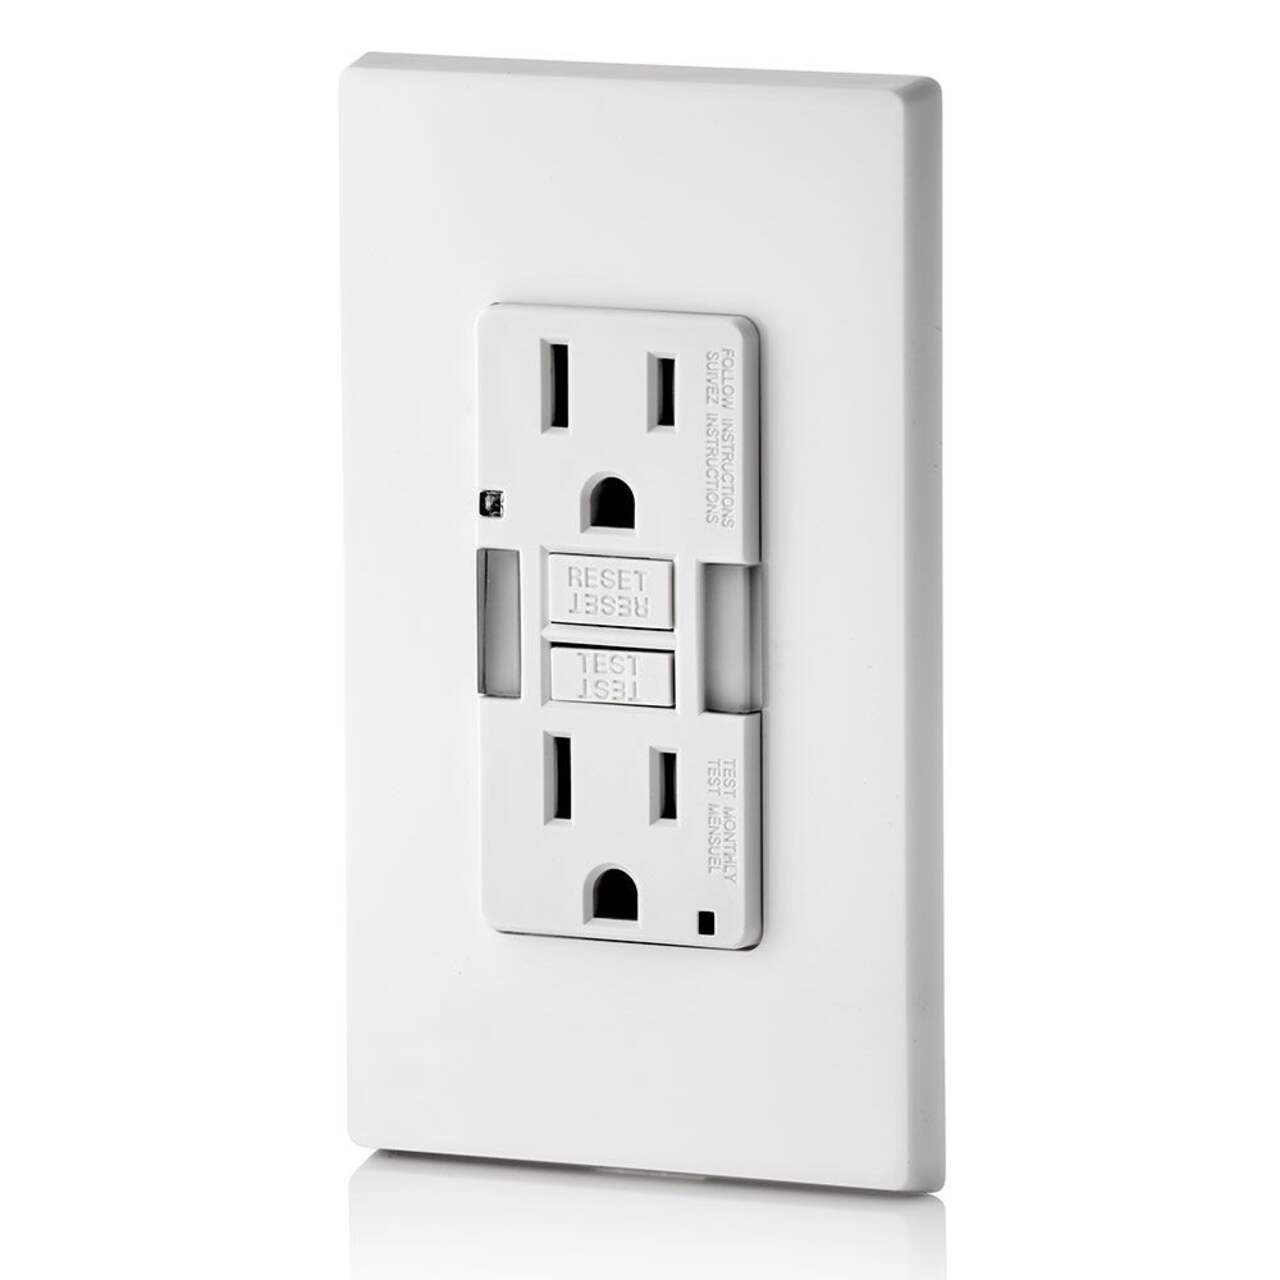 Leviton GFNL1-772 Tamper-Resistant GFCI Receptacle/Outlet with LED Night  Guide Light and Wall Plate, White